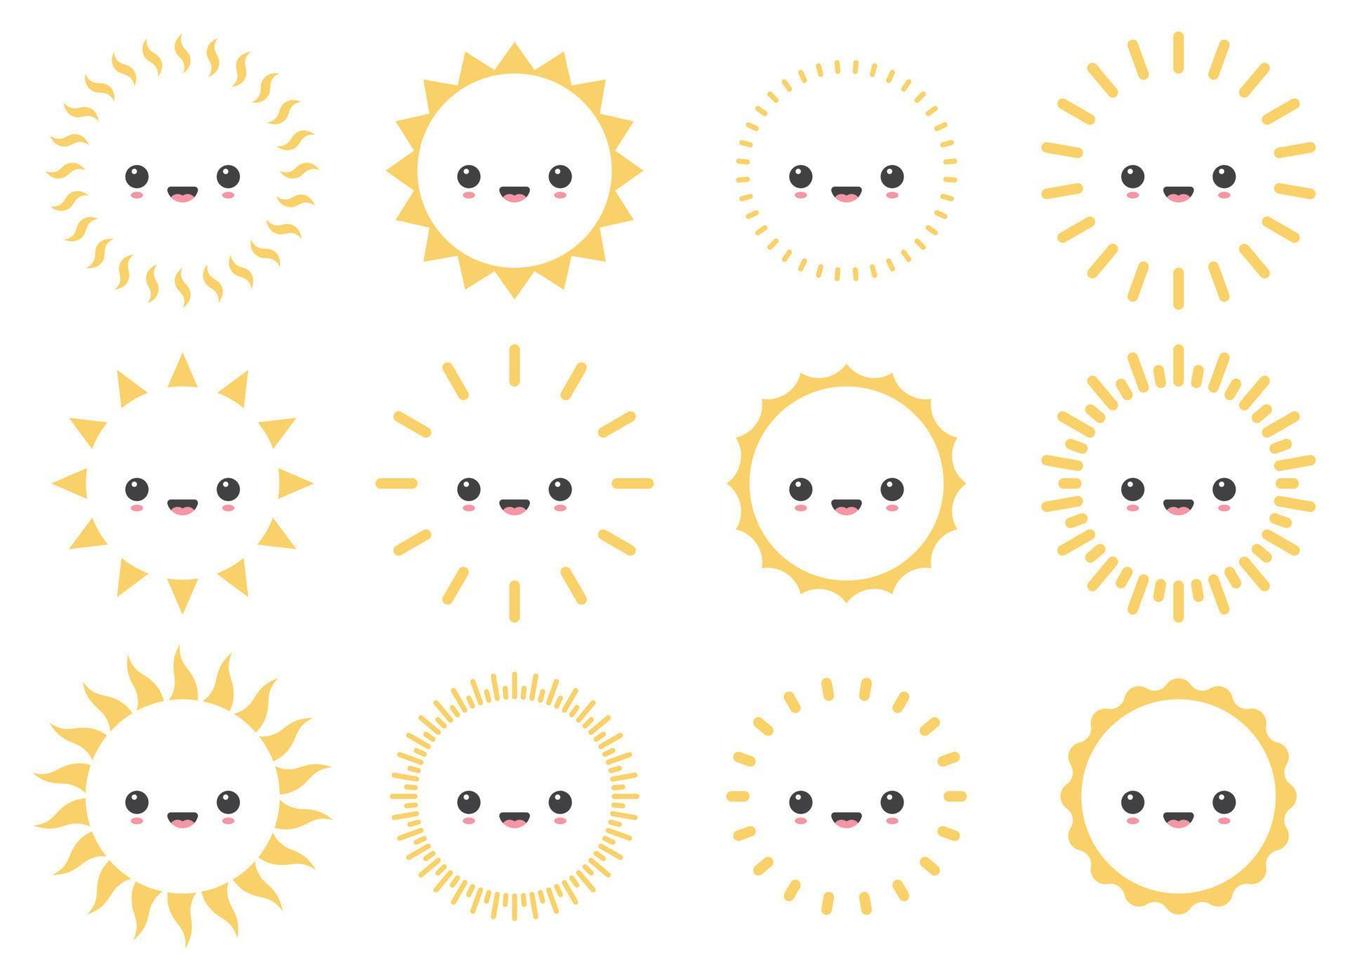 Cartoon sun icon with facial expression vector illustration isolated on white